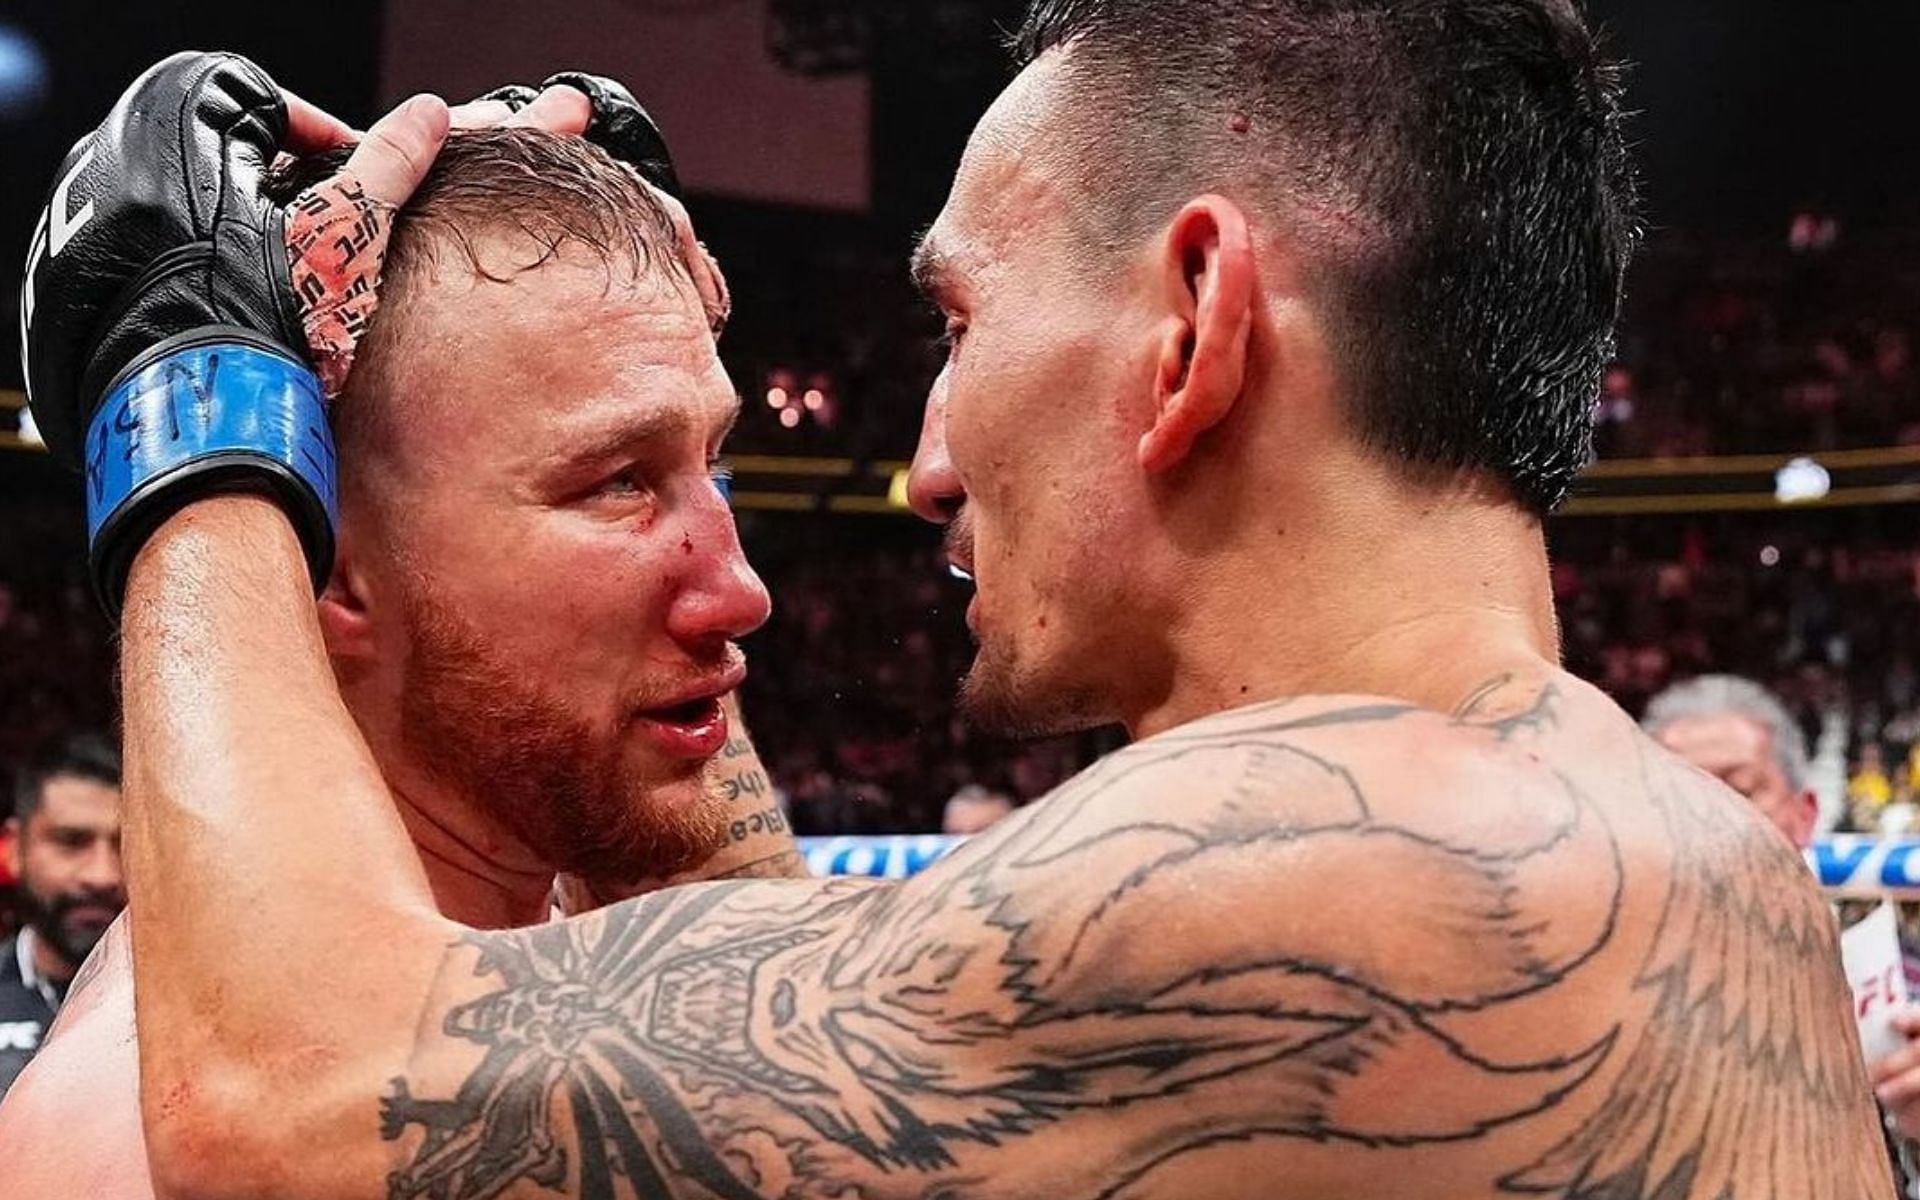 Max Holloway (right) opens up about fighting Justin Gaethje (left) [Image via: @blessedmma on Instagram]